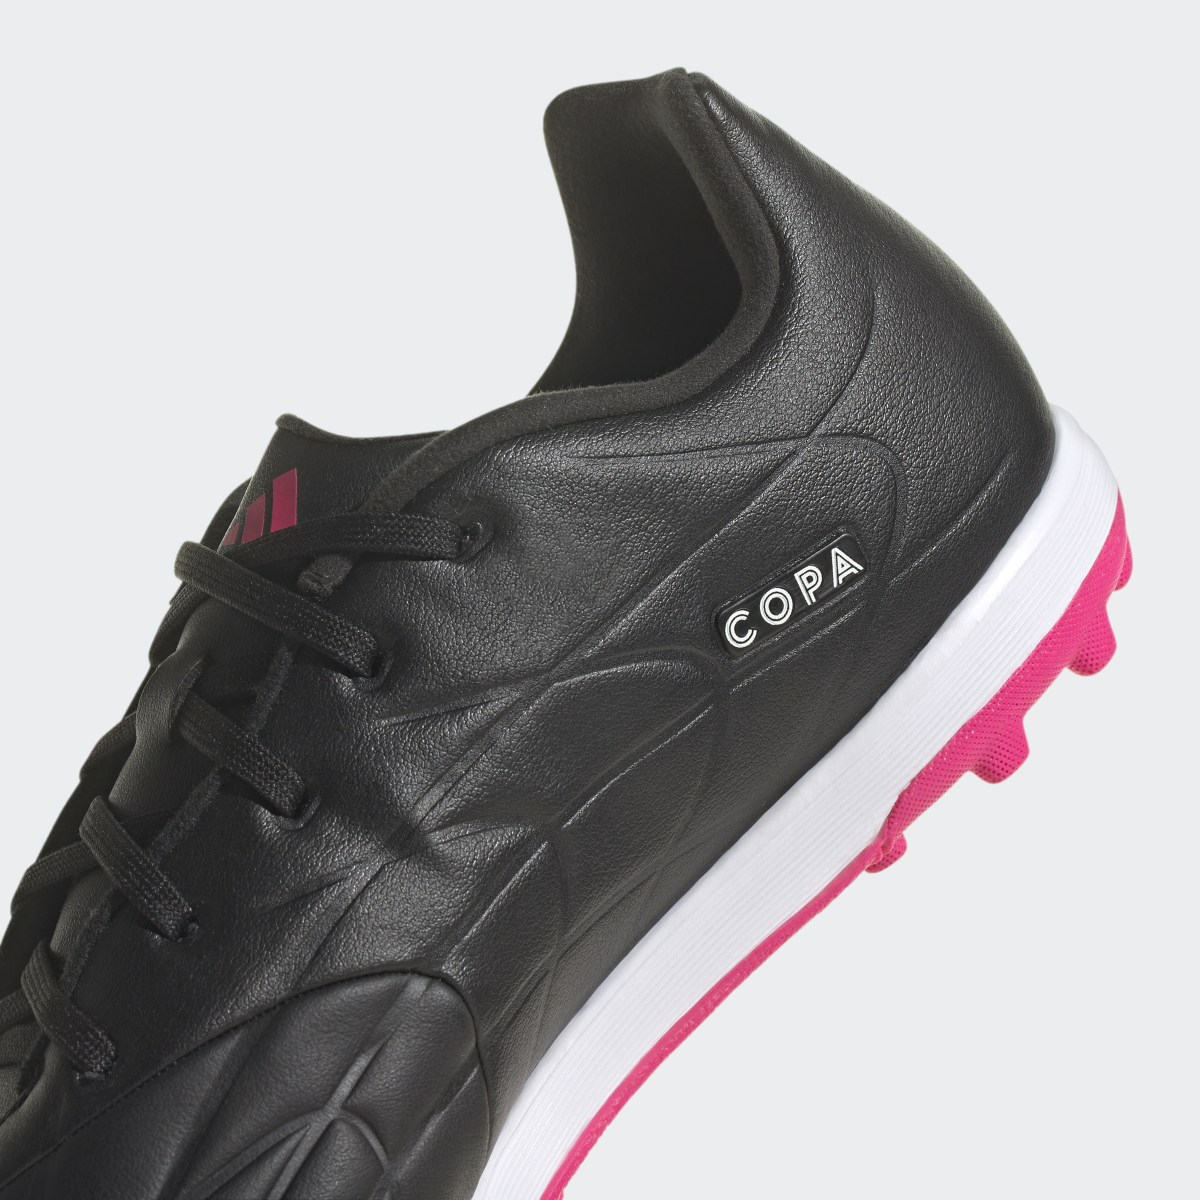 Adidas Copa Pure.3 Turf Boots. 9